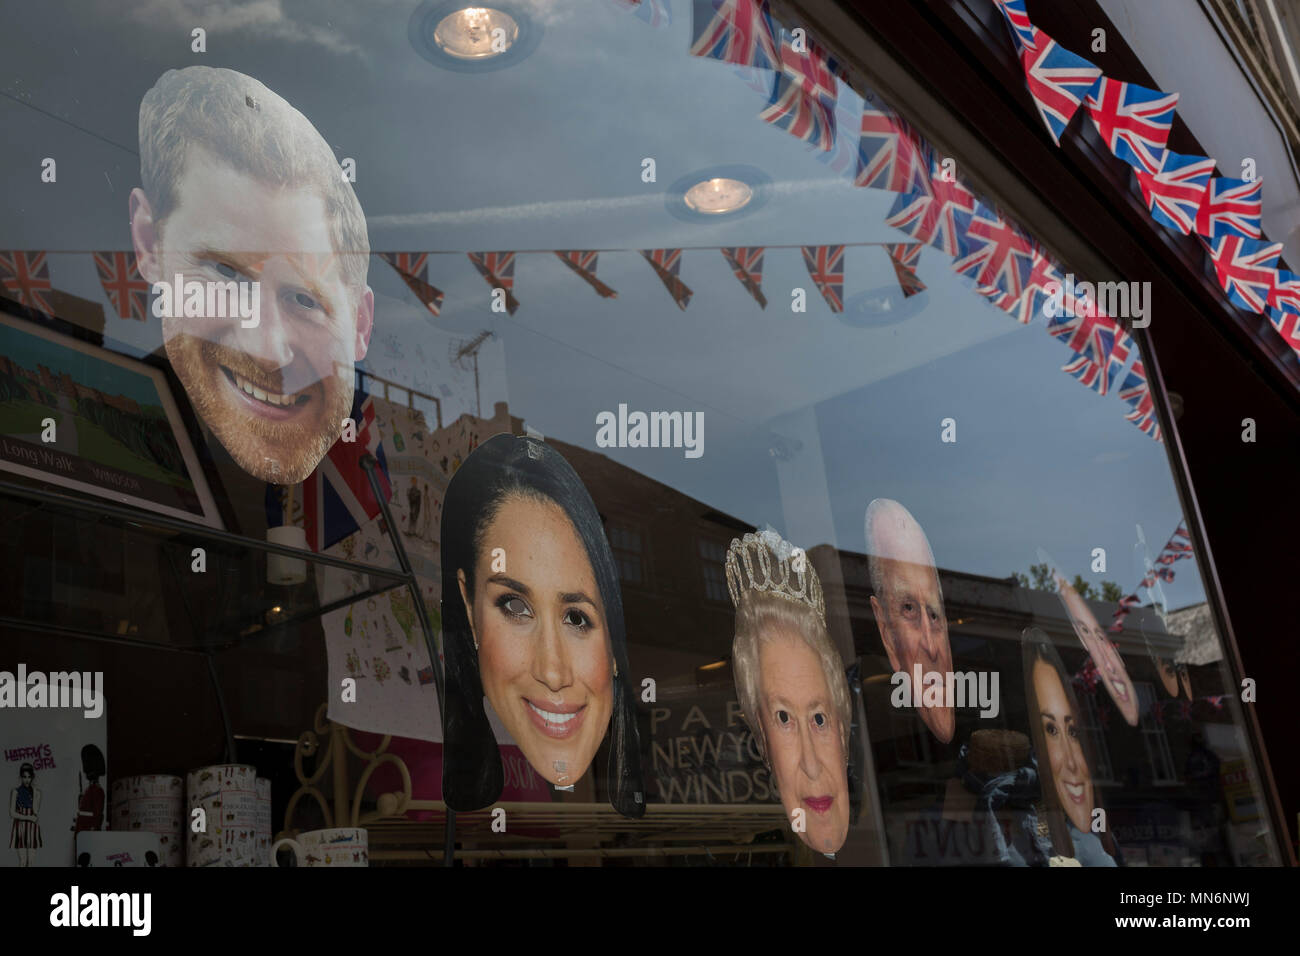 Face masks of the royal family in a shop window as the royal town of Windsor gets ready for the royal wedding between Prince Harry and his American fiance Meghan Markle, on 14th May 2018, in London, England. Stock Photo